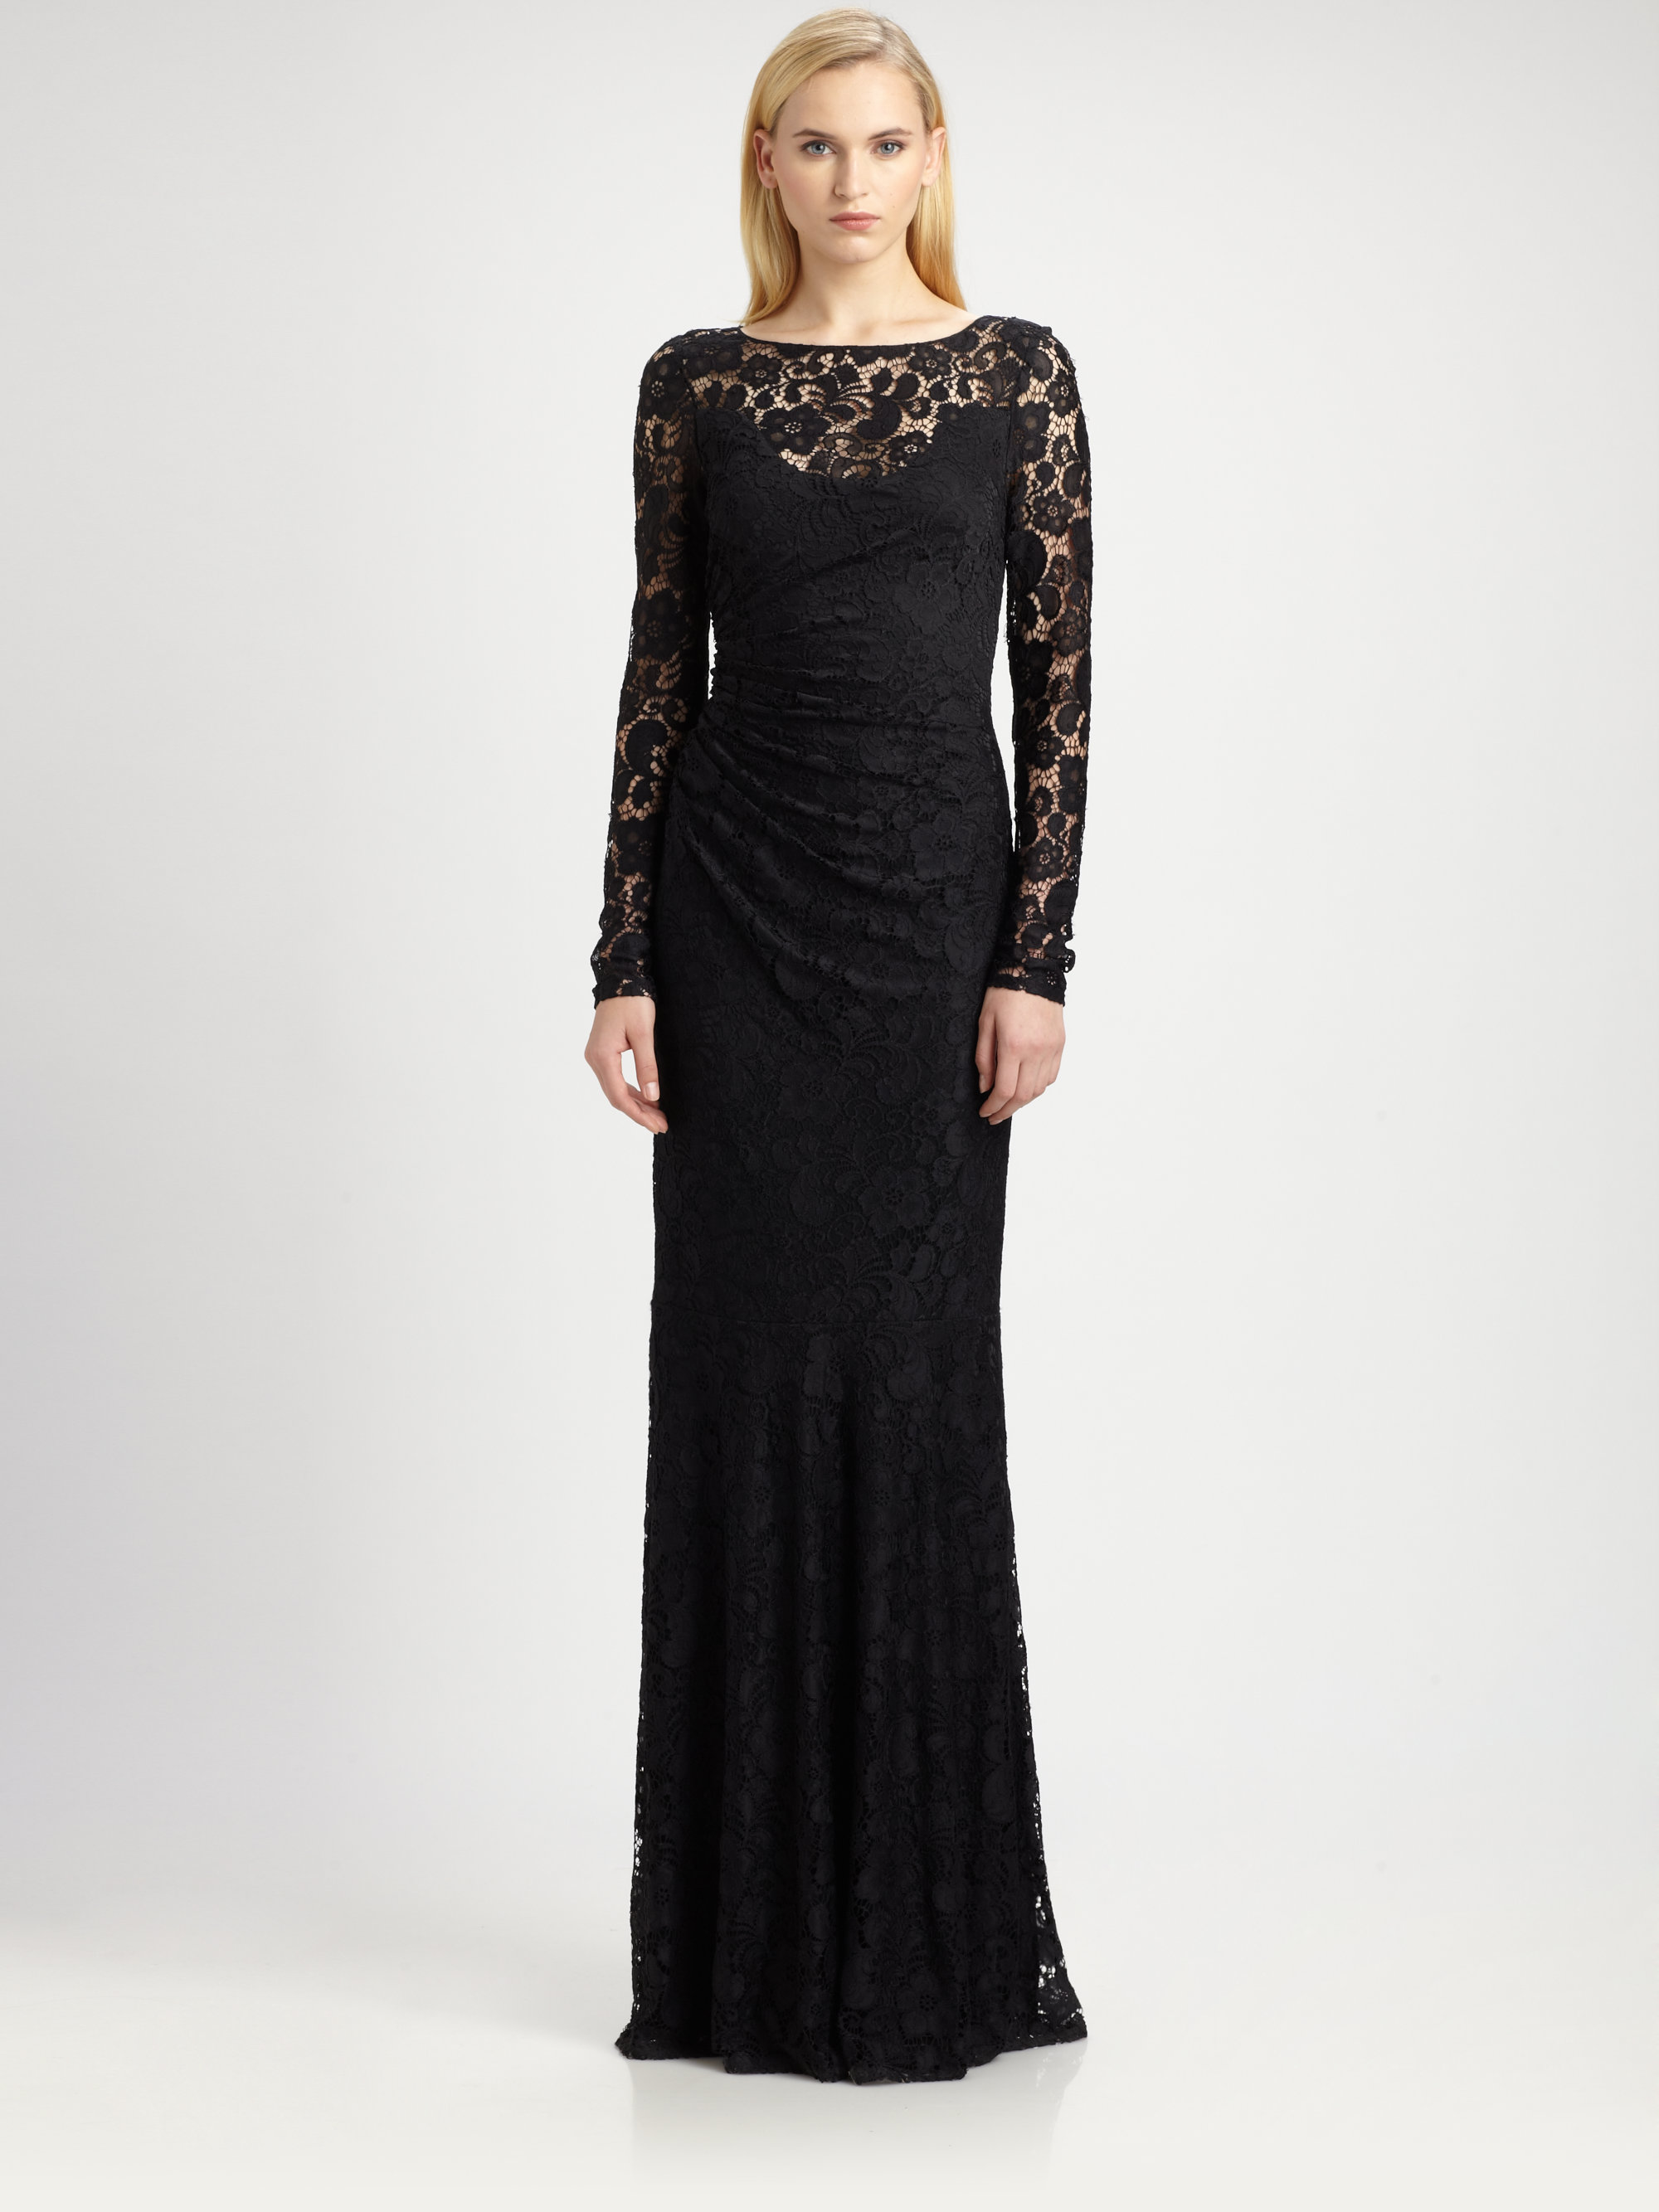 Lyst - David meister Lace Gown in Black